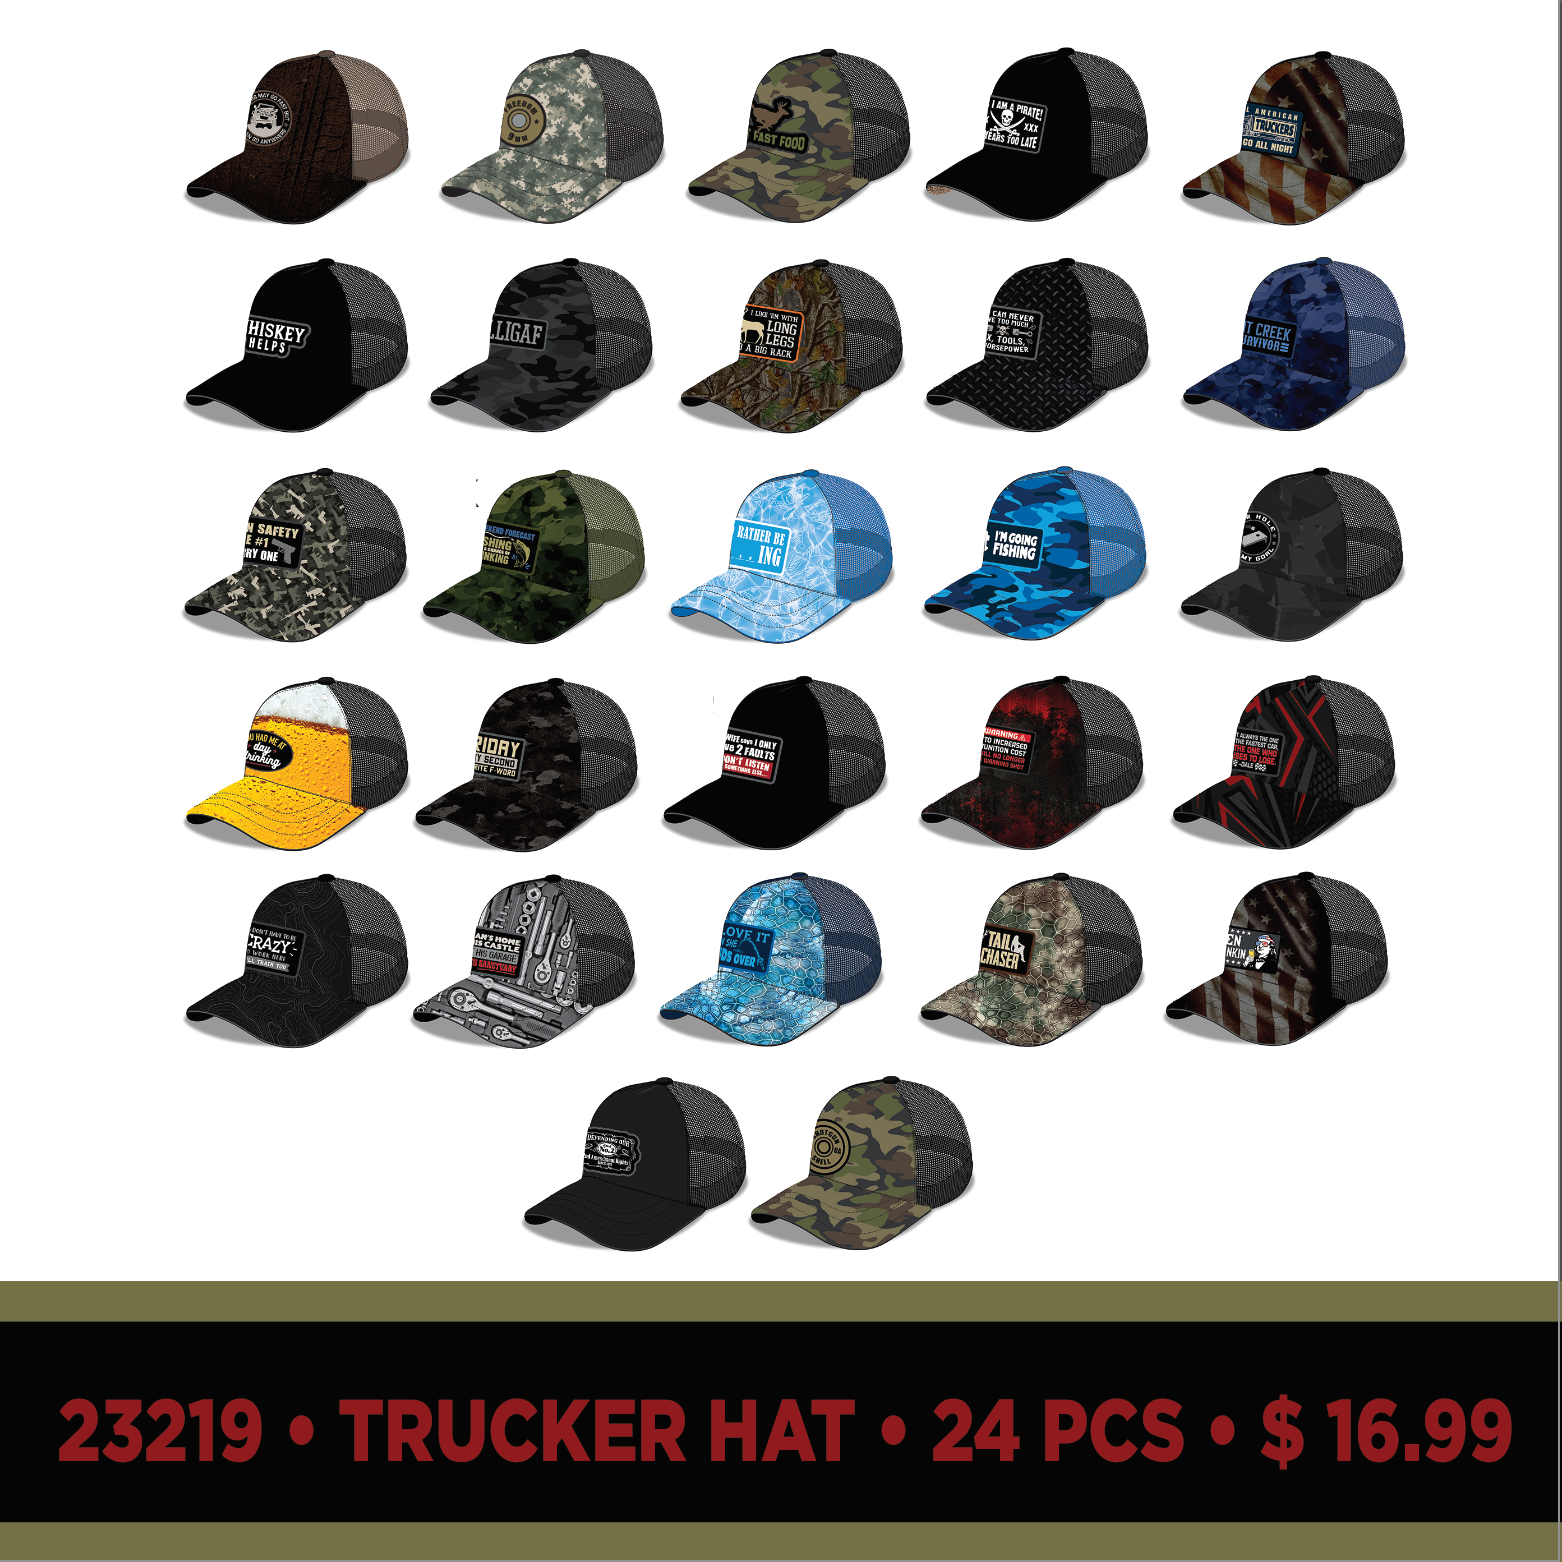 ITEM NUMBER 023219L TRUCKER HAT W PATCH - STORE SURPLUS NO DISPLAY 24  PIECES PER PACK